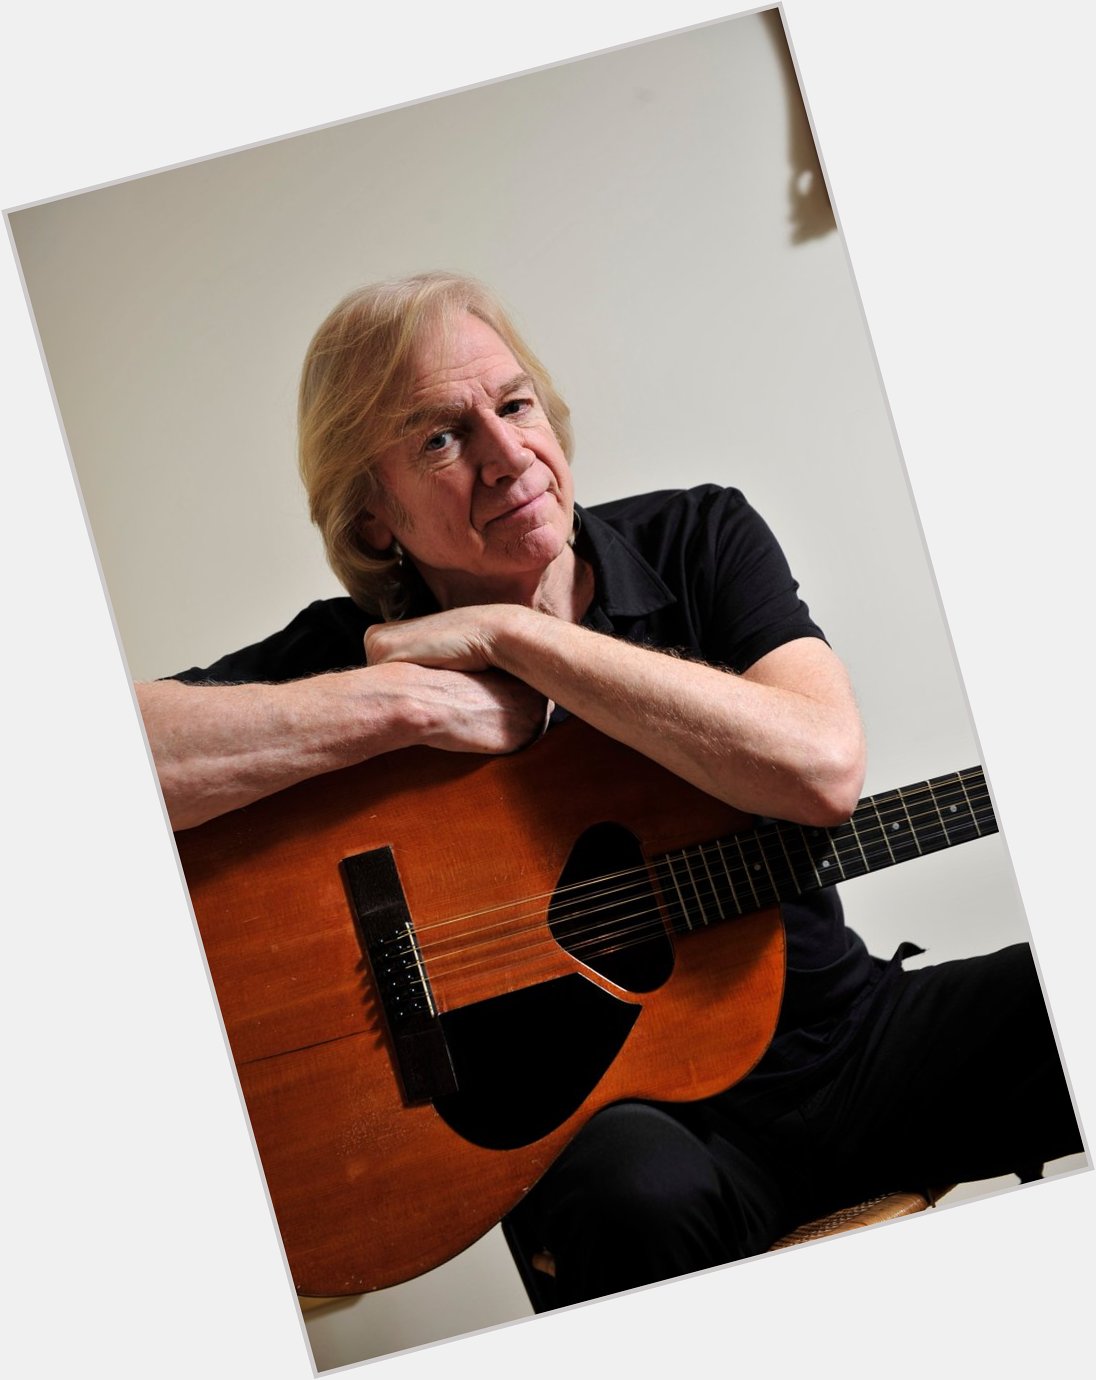 And a happy 72nd birthday to Moody Blues legend Justin Hayward... 